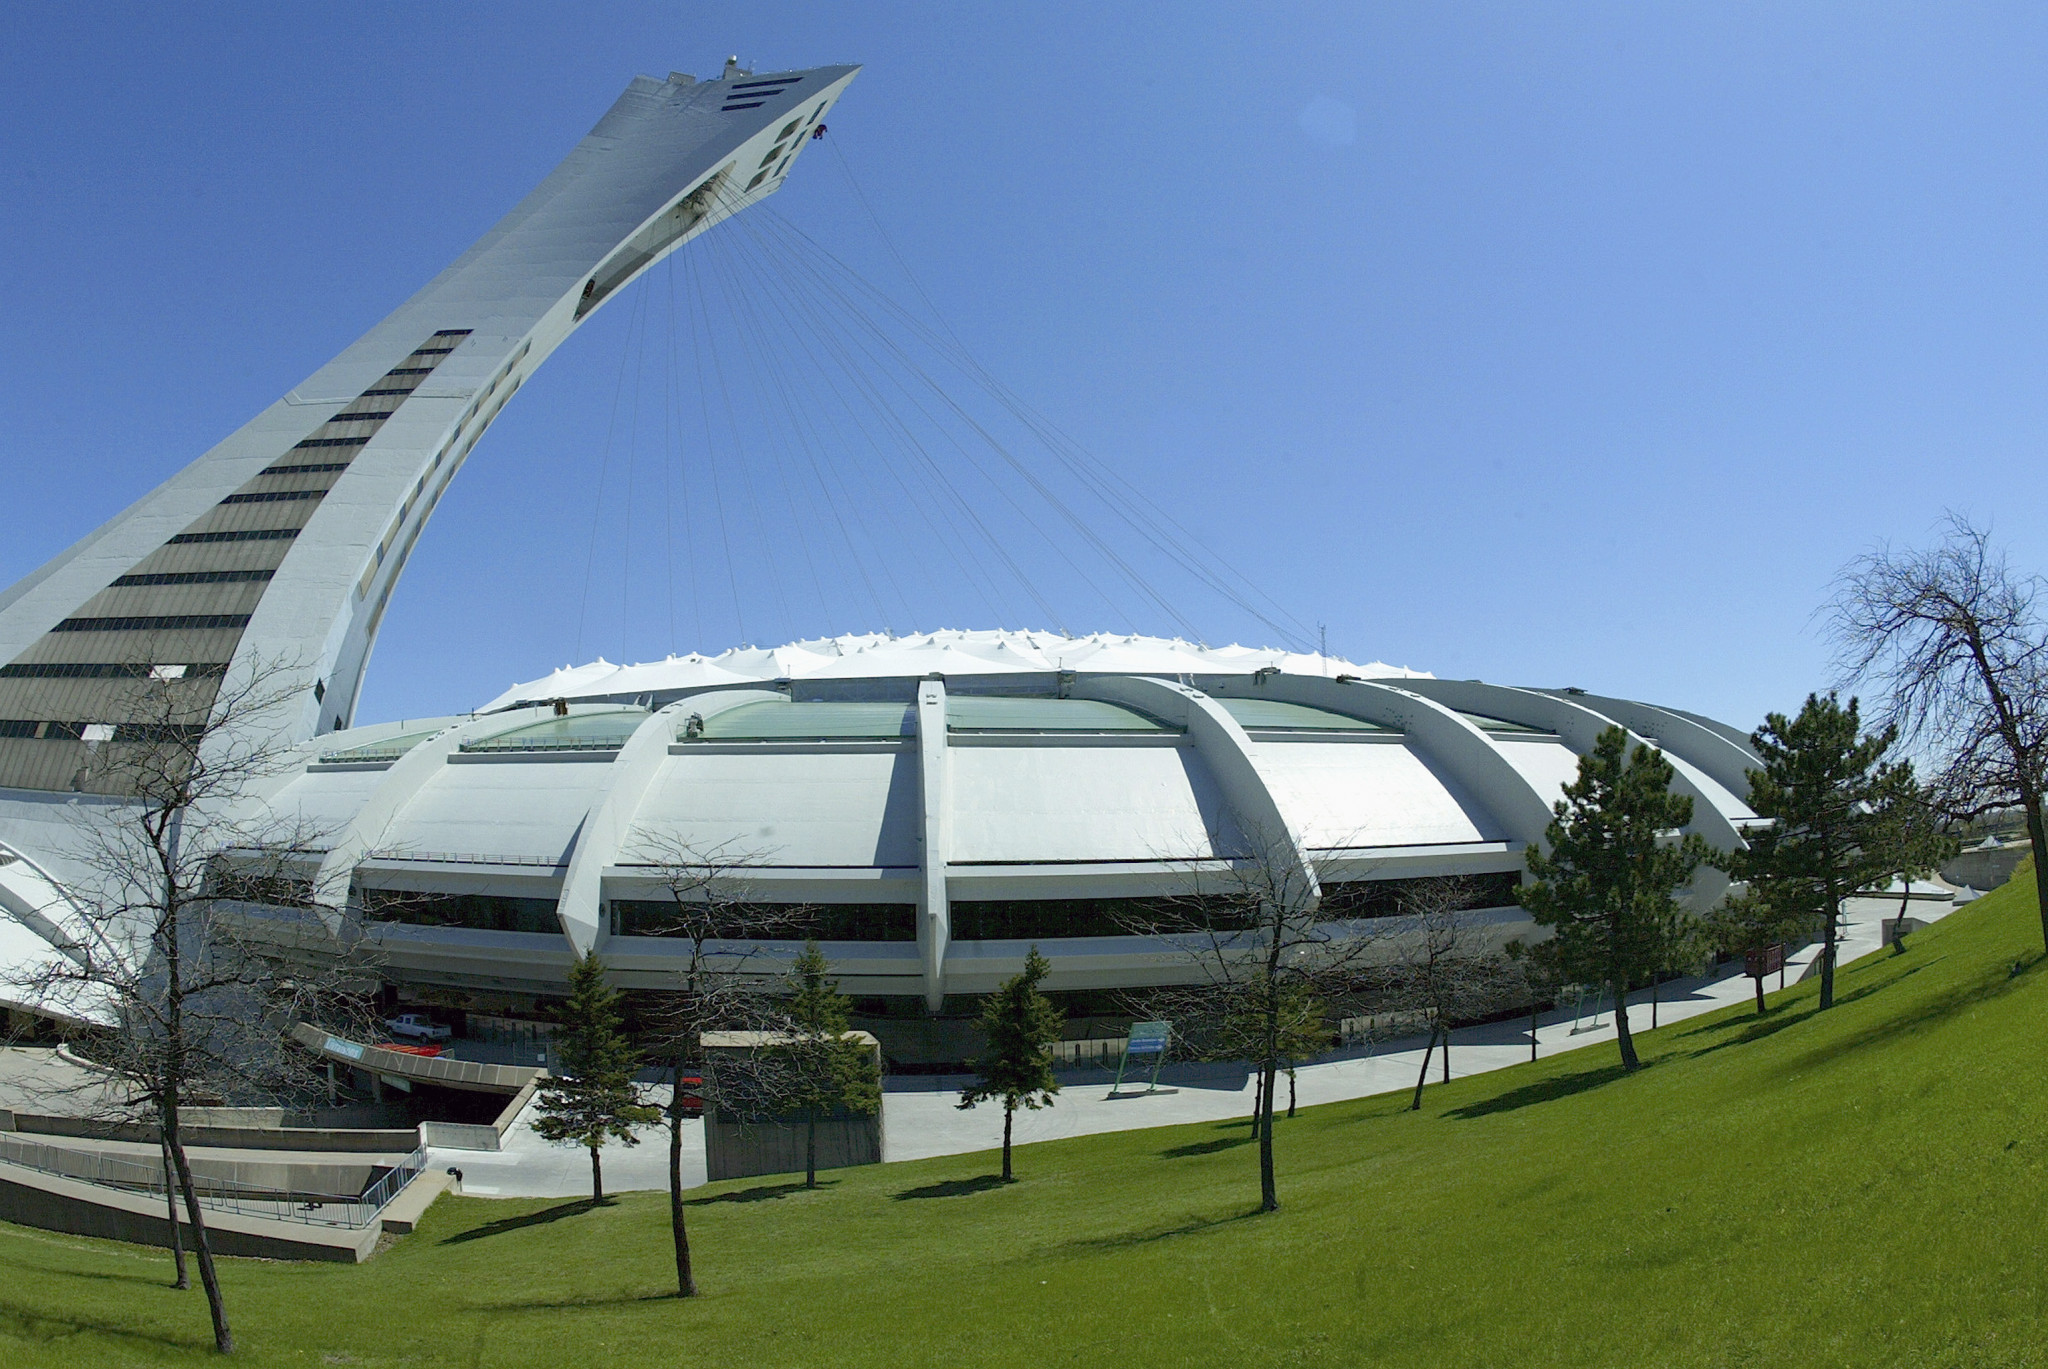 The Olympic Stadium in Montreal has been mooted as a potential venue for the 2026 FIFA World Cup ©Getty Images